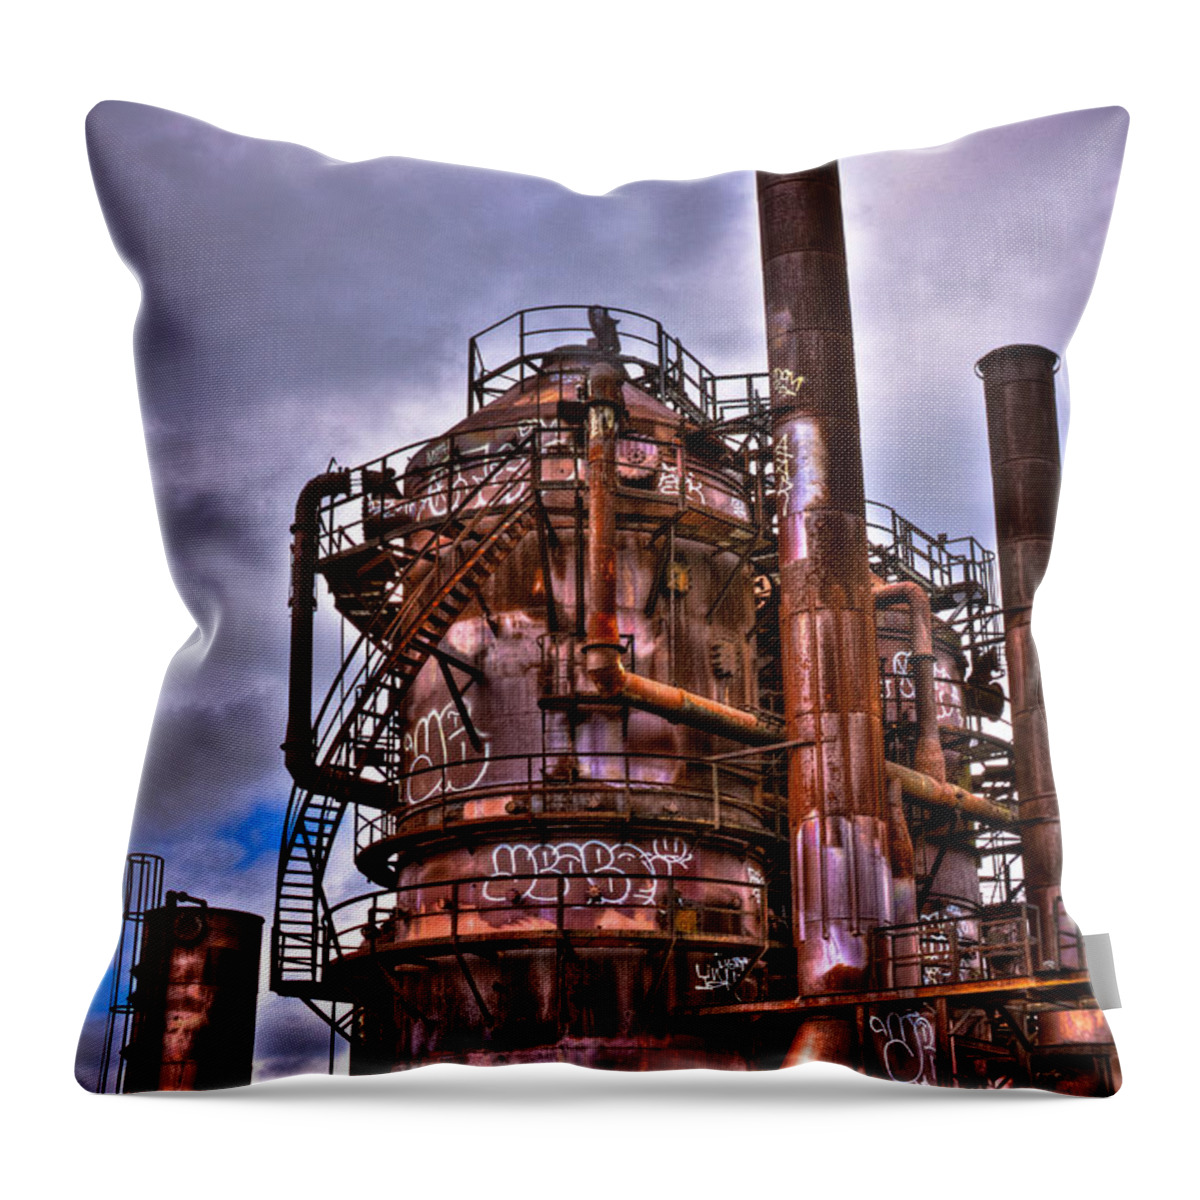 Gasworks Park Throw Pillow featuring the photograph The Compressor Building at Gasworks Park - Seattle Washington by David Patterson